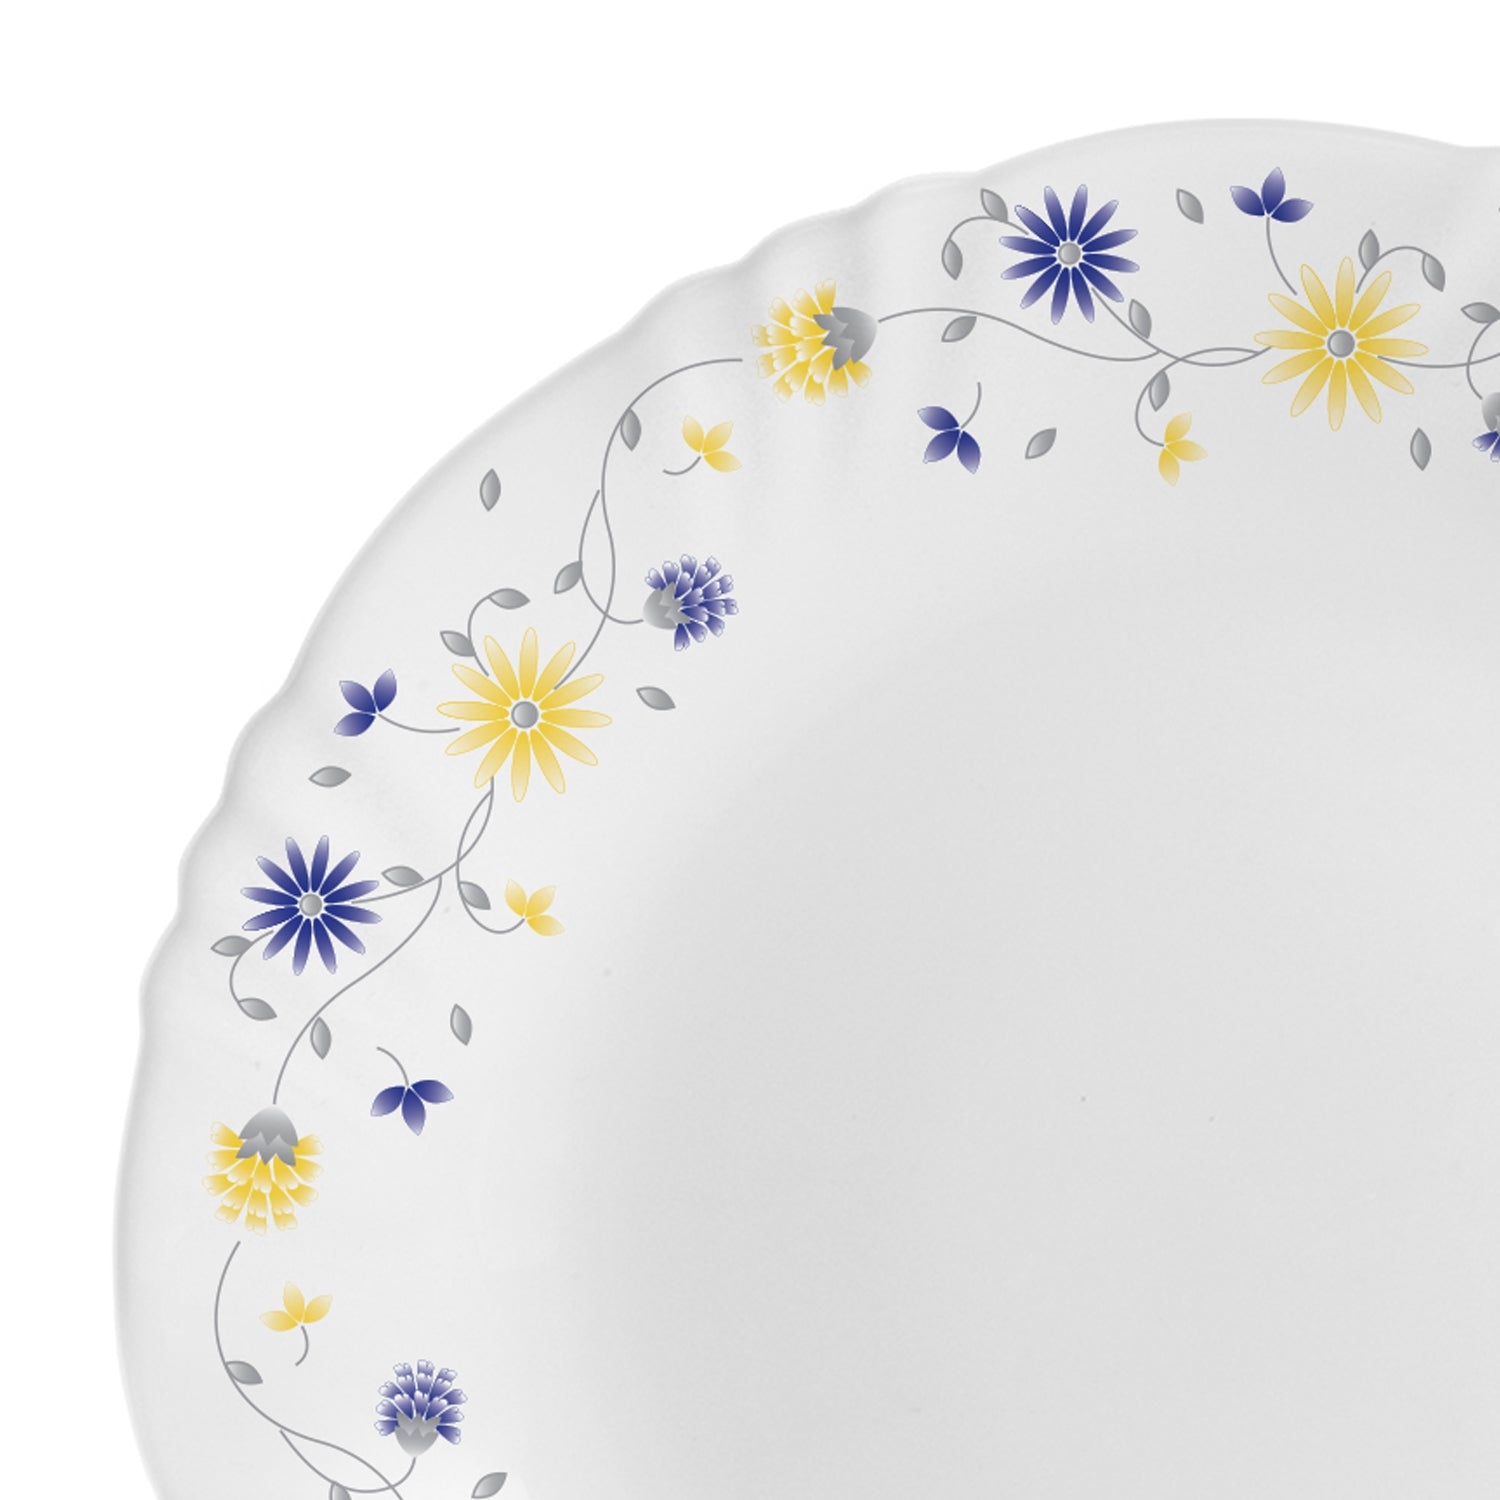 Imperial Series 33 Pieces Opalware Dinner Set for Family of 6 Blooming Daisy